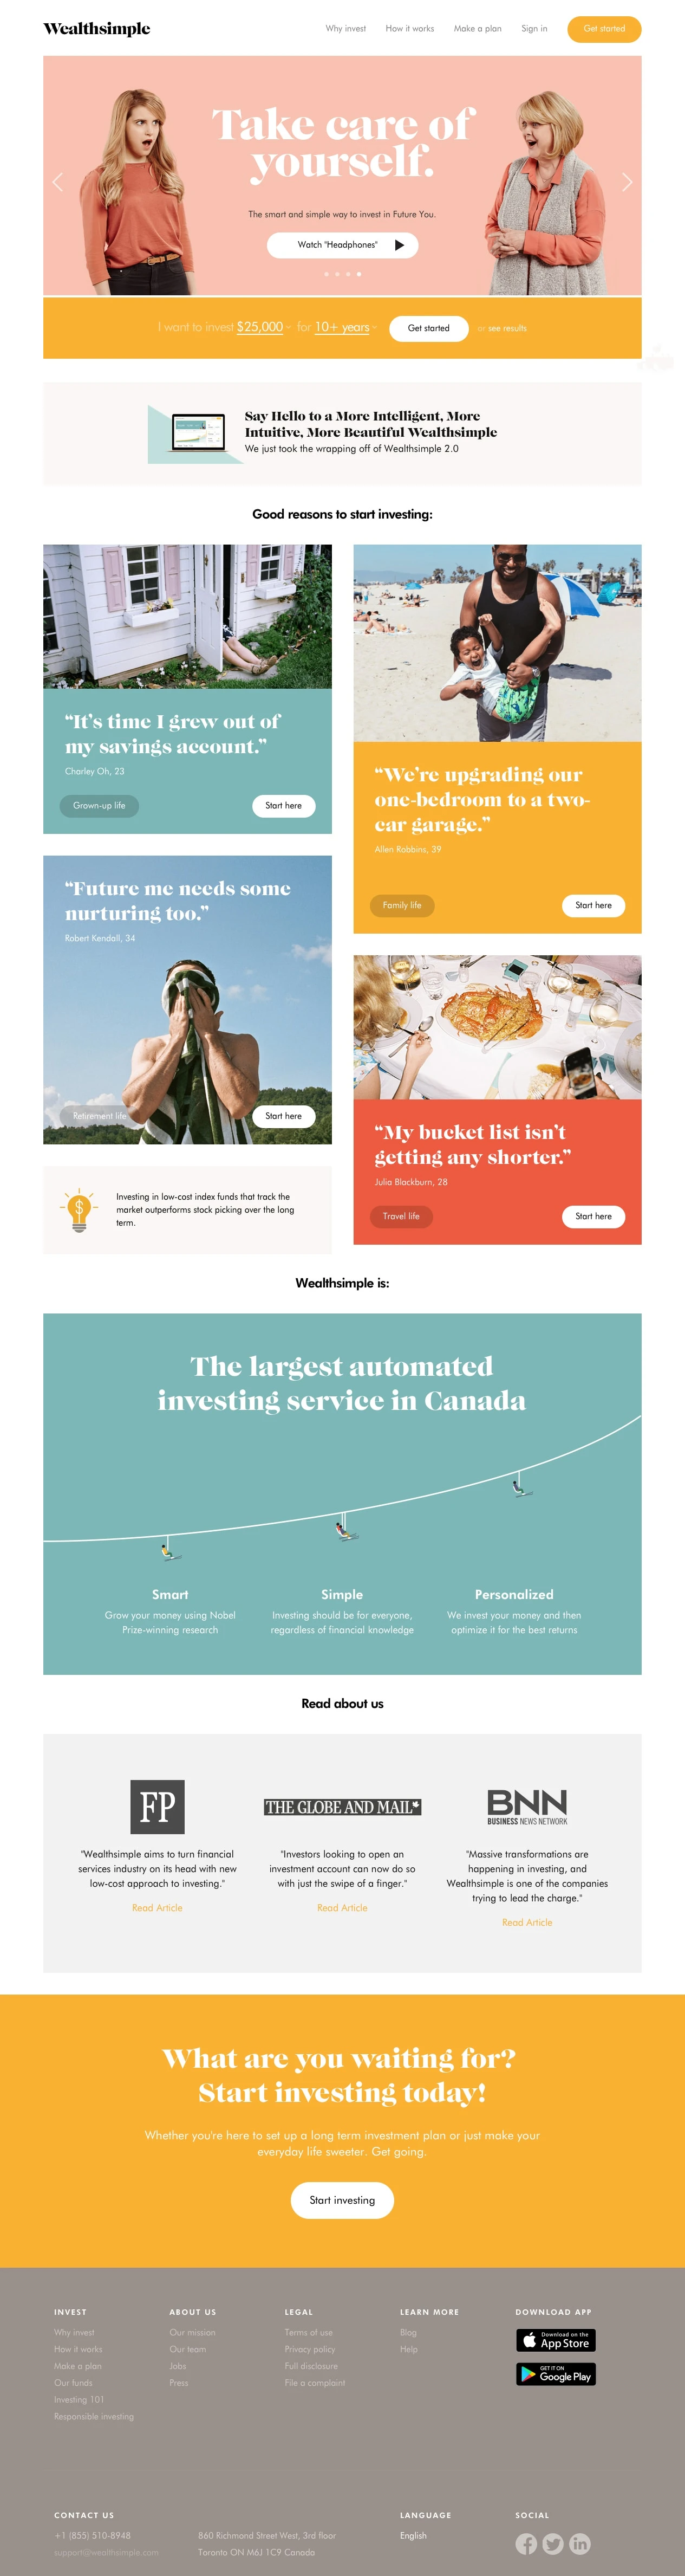 Wealthsimple Landing Page Example: The smart and simple way to invest in Future You. We use a Nobel Prize-winning approach to build you a diversified portfolio of low-fee funds in minutes.